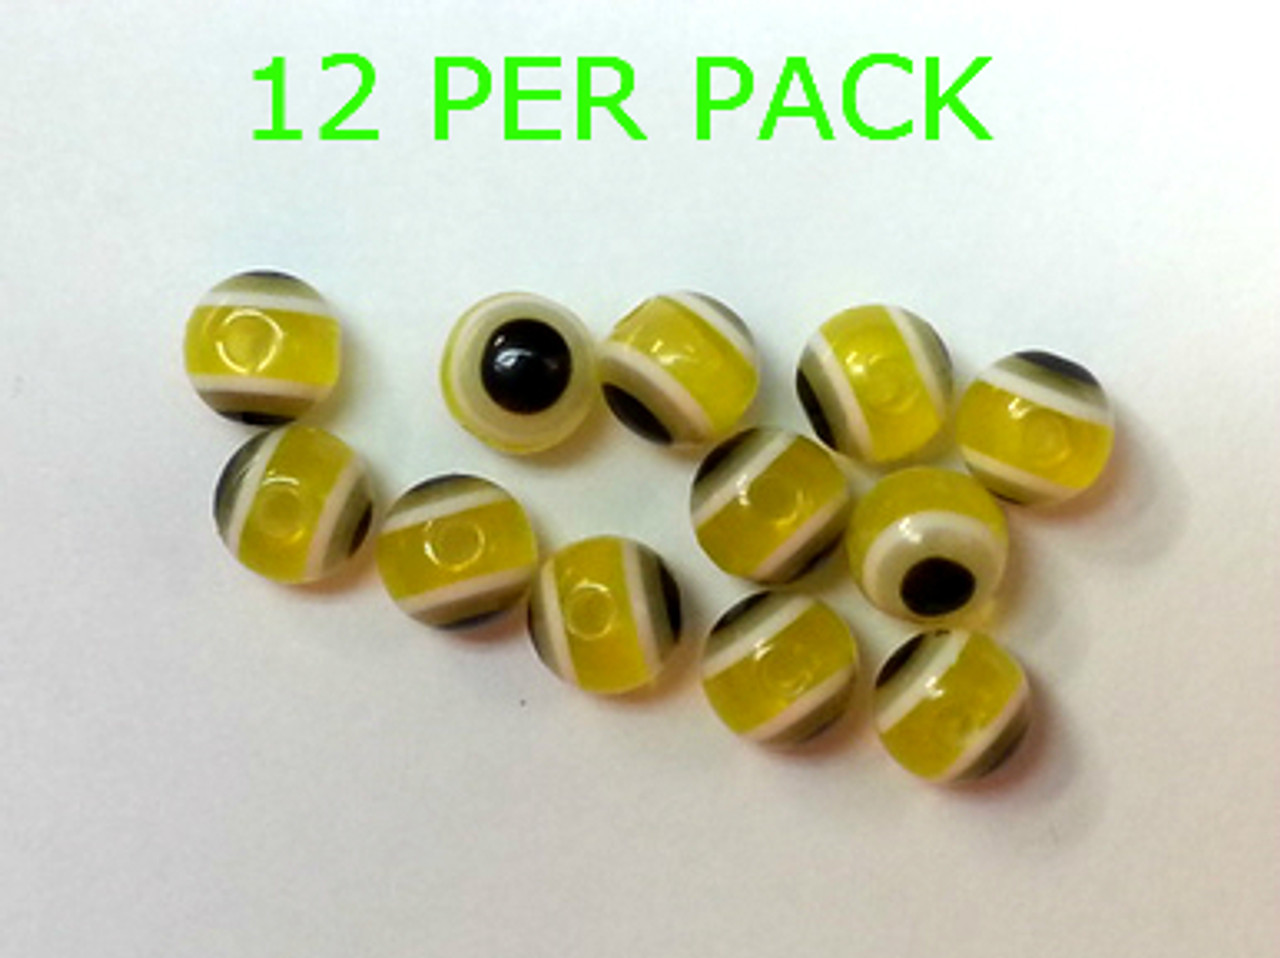 https://cdn11.bigcommerce.com/s-u9nbd/images/stencil/1280x1280/products/519/13153/yellow_lure_beads_with_eyes__19135.1556121138.jpg?c=2